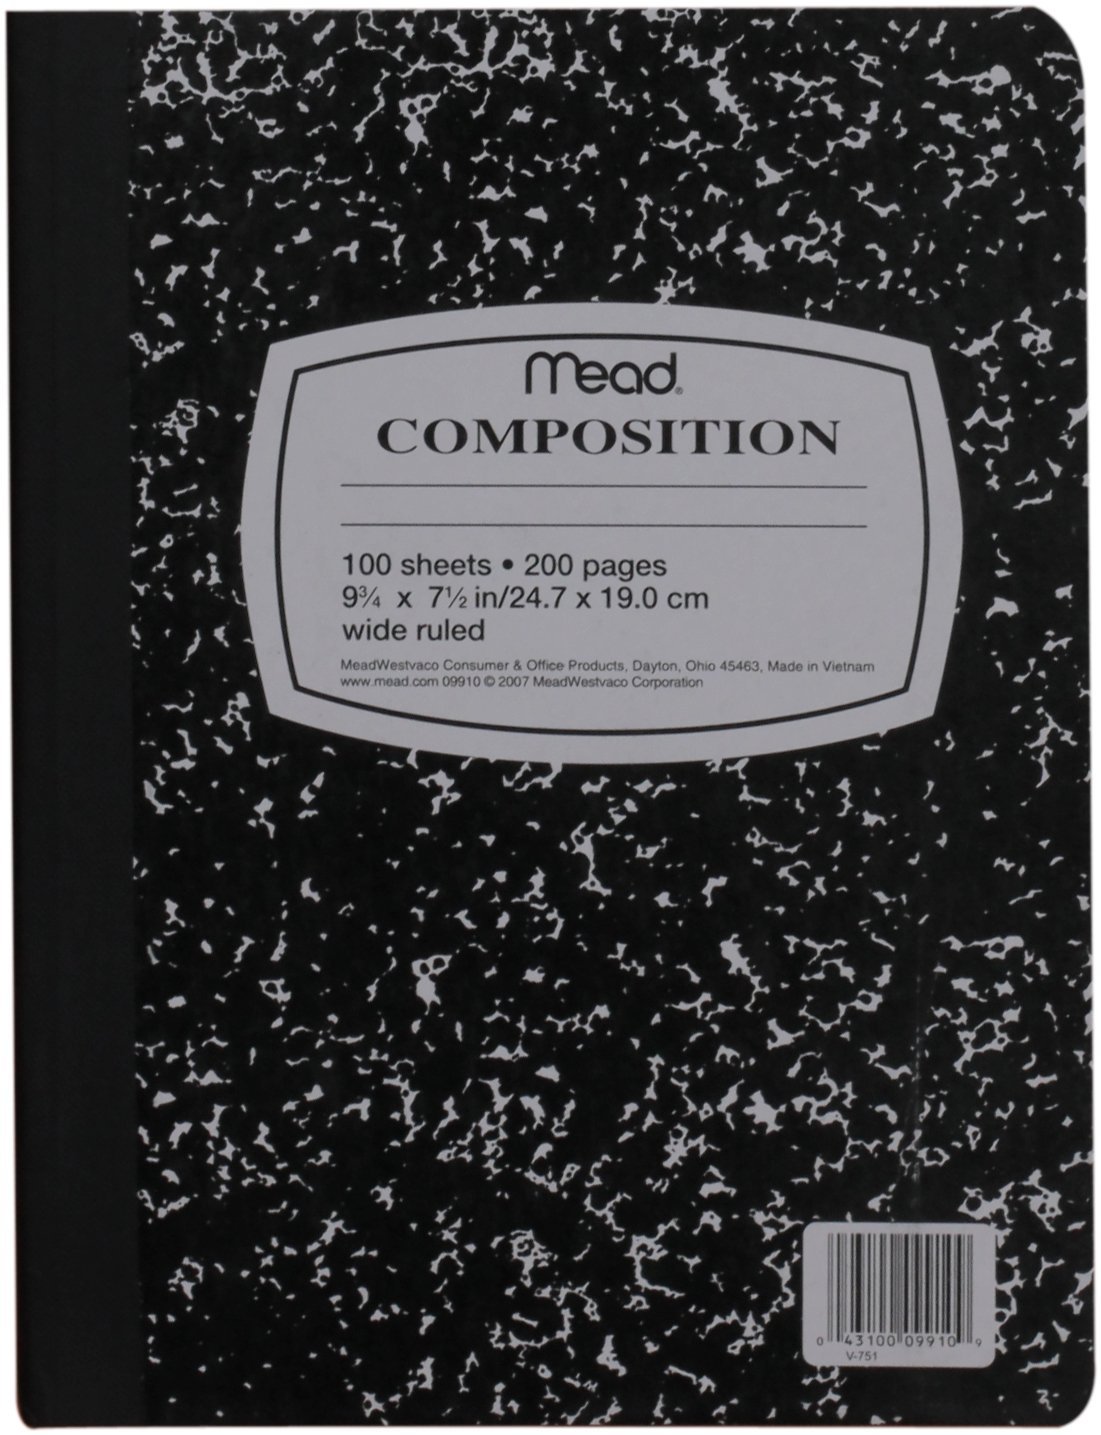 Composition Notebook Clipart Images   Pictures   Becuo